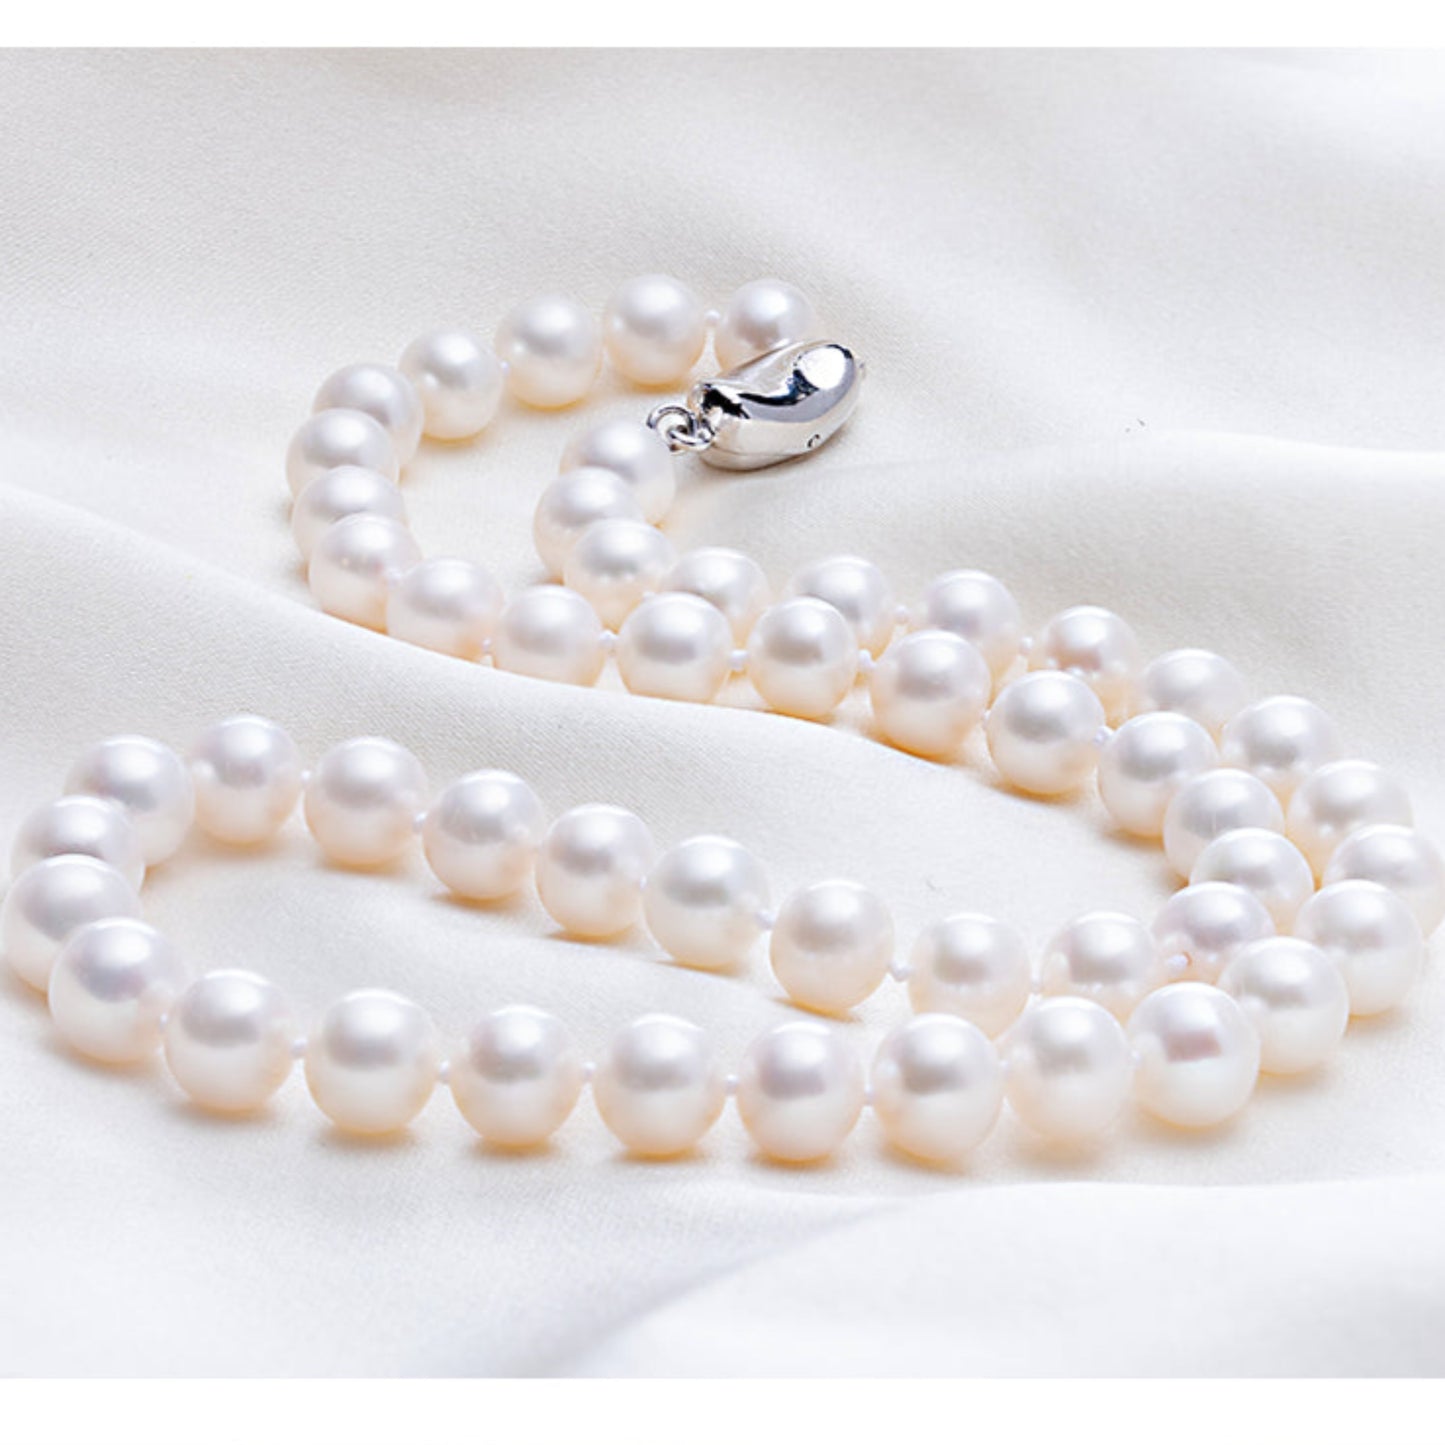 6.5-7.0mm White Freshwater Pearl Necklace, Perfect Round